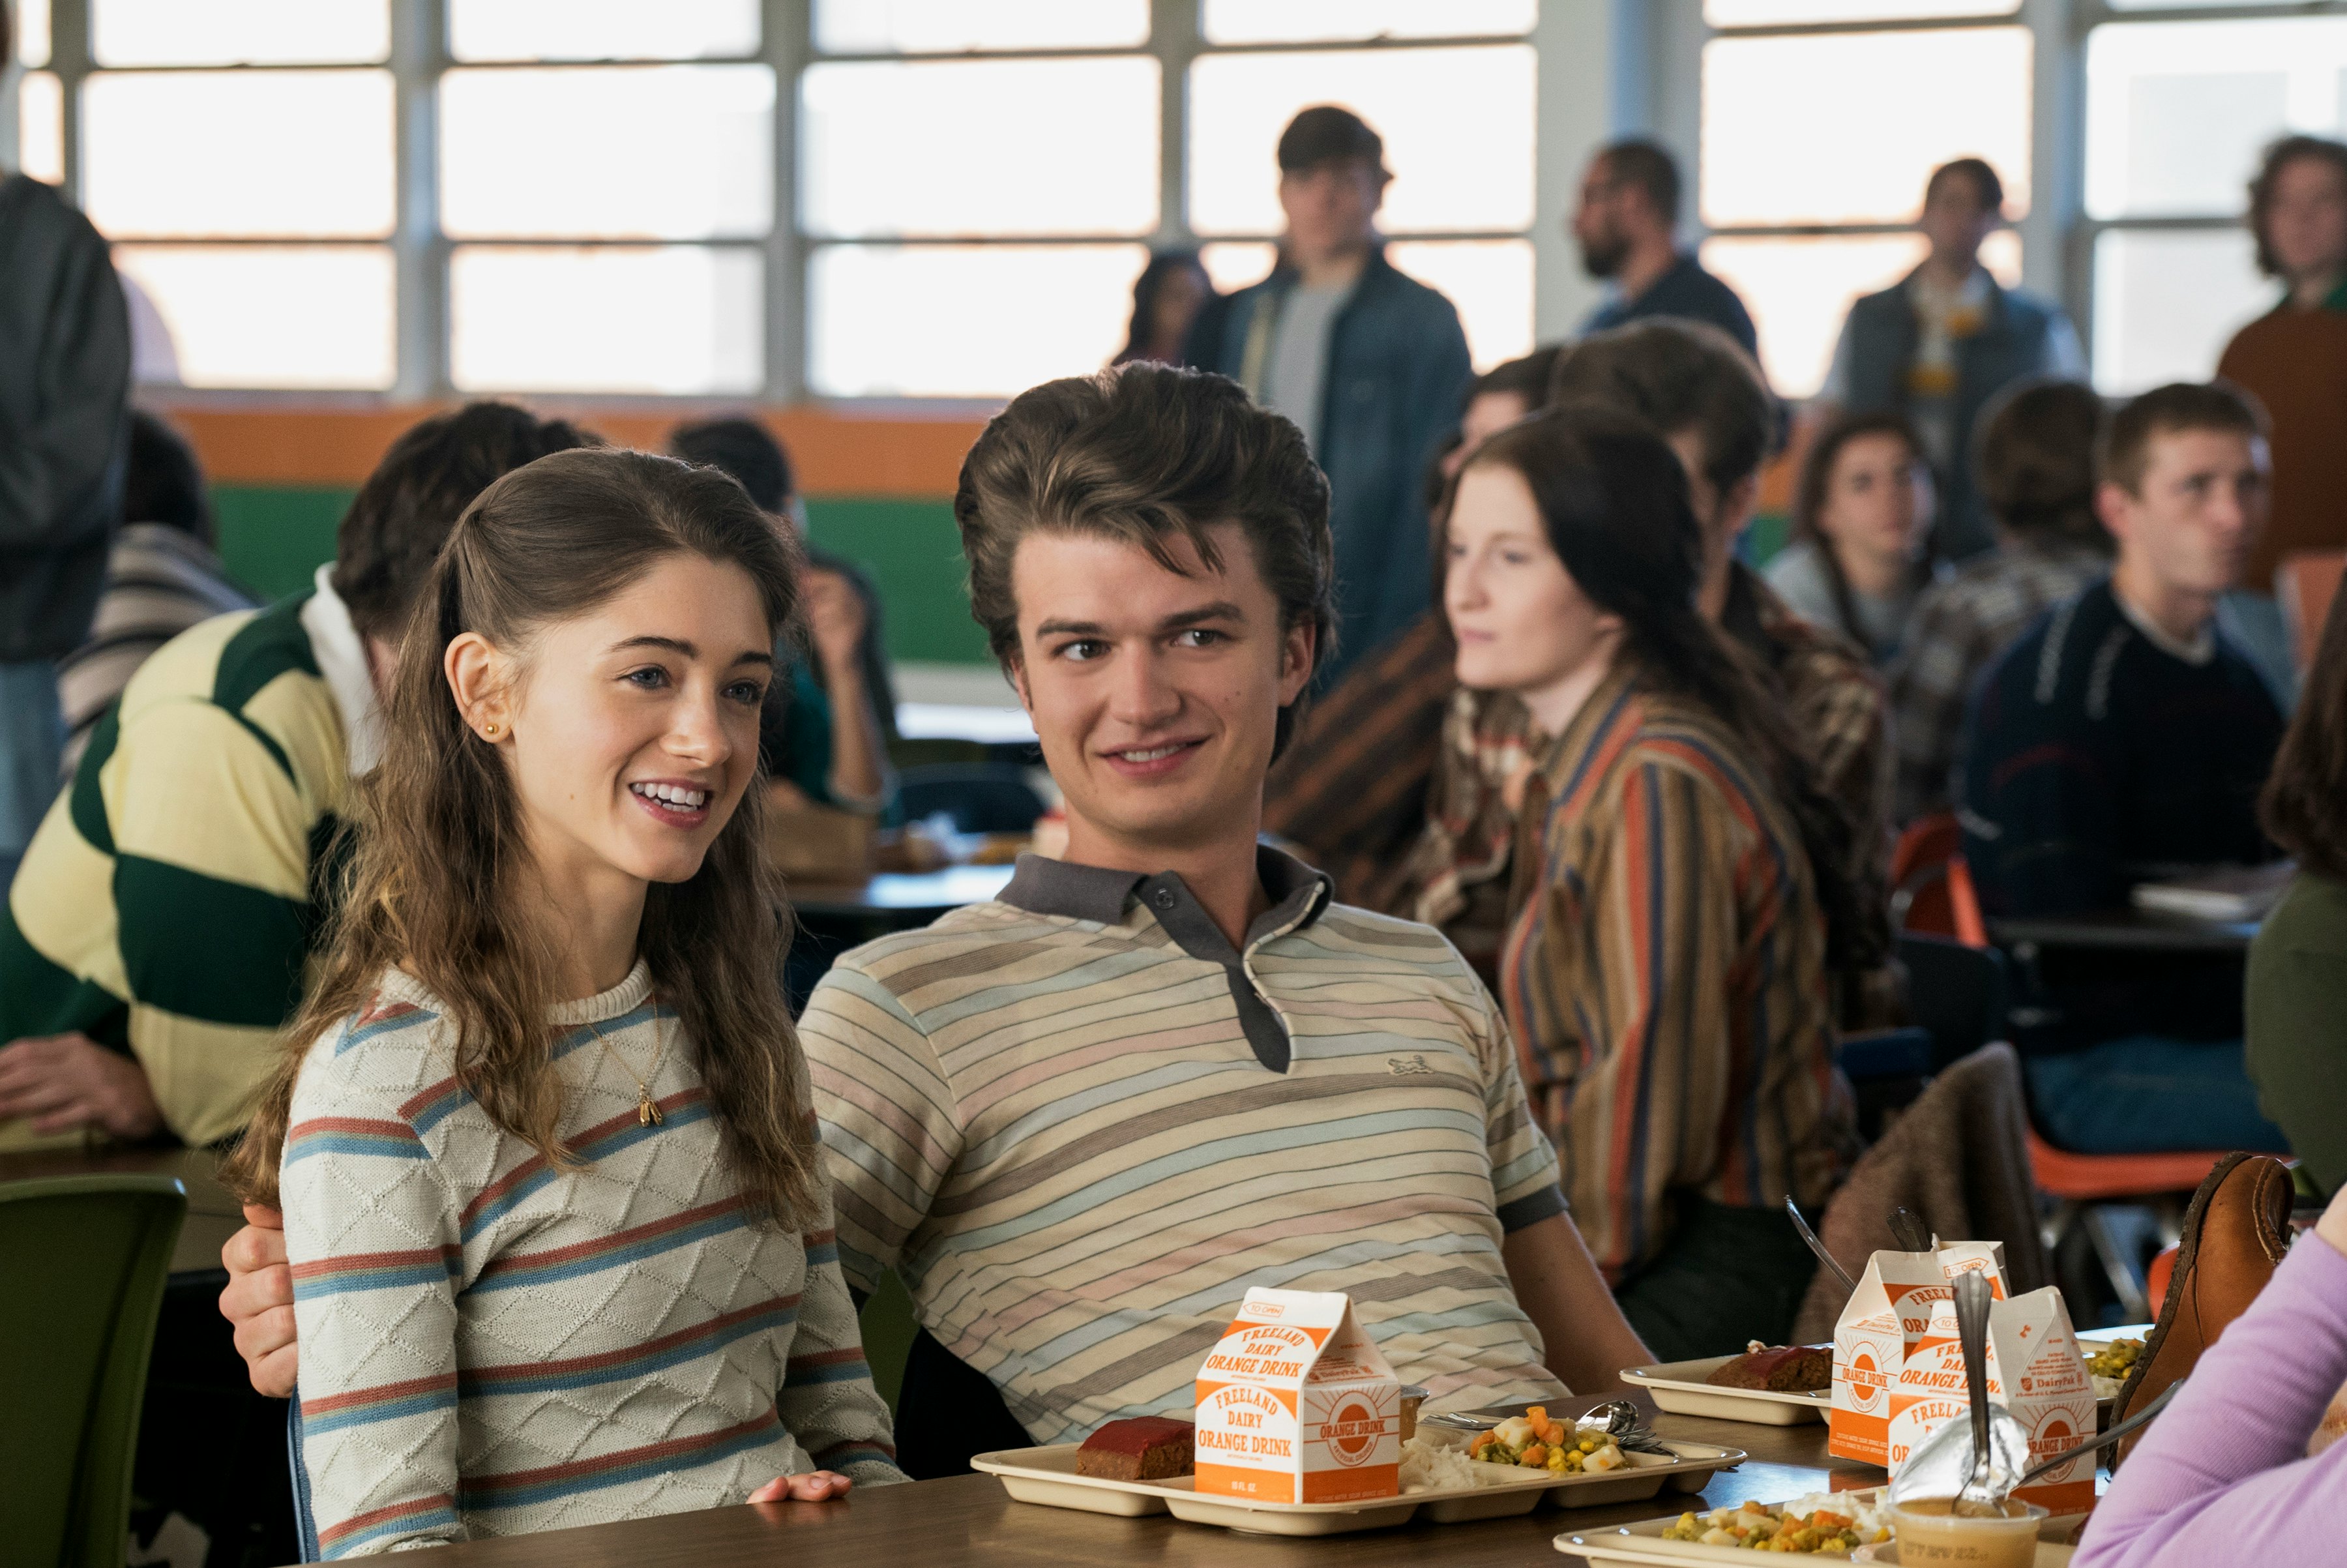 Why Jonathan Nancy In Stranger Things 3 Make A Great Couple